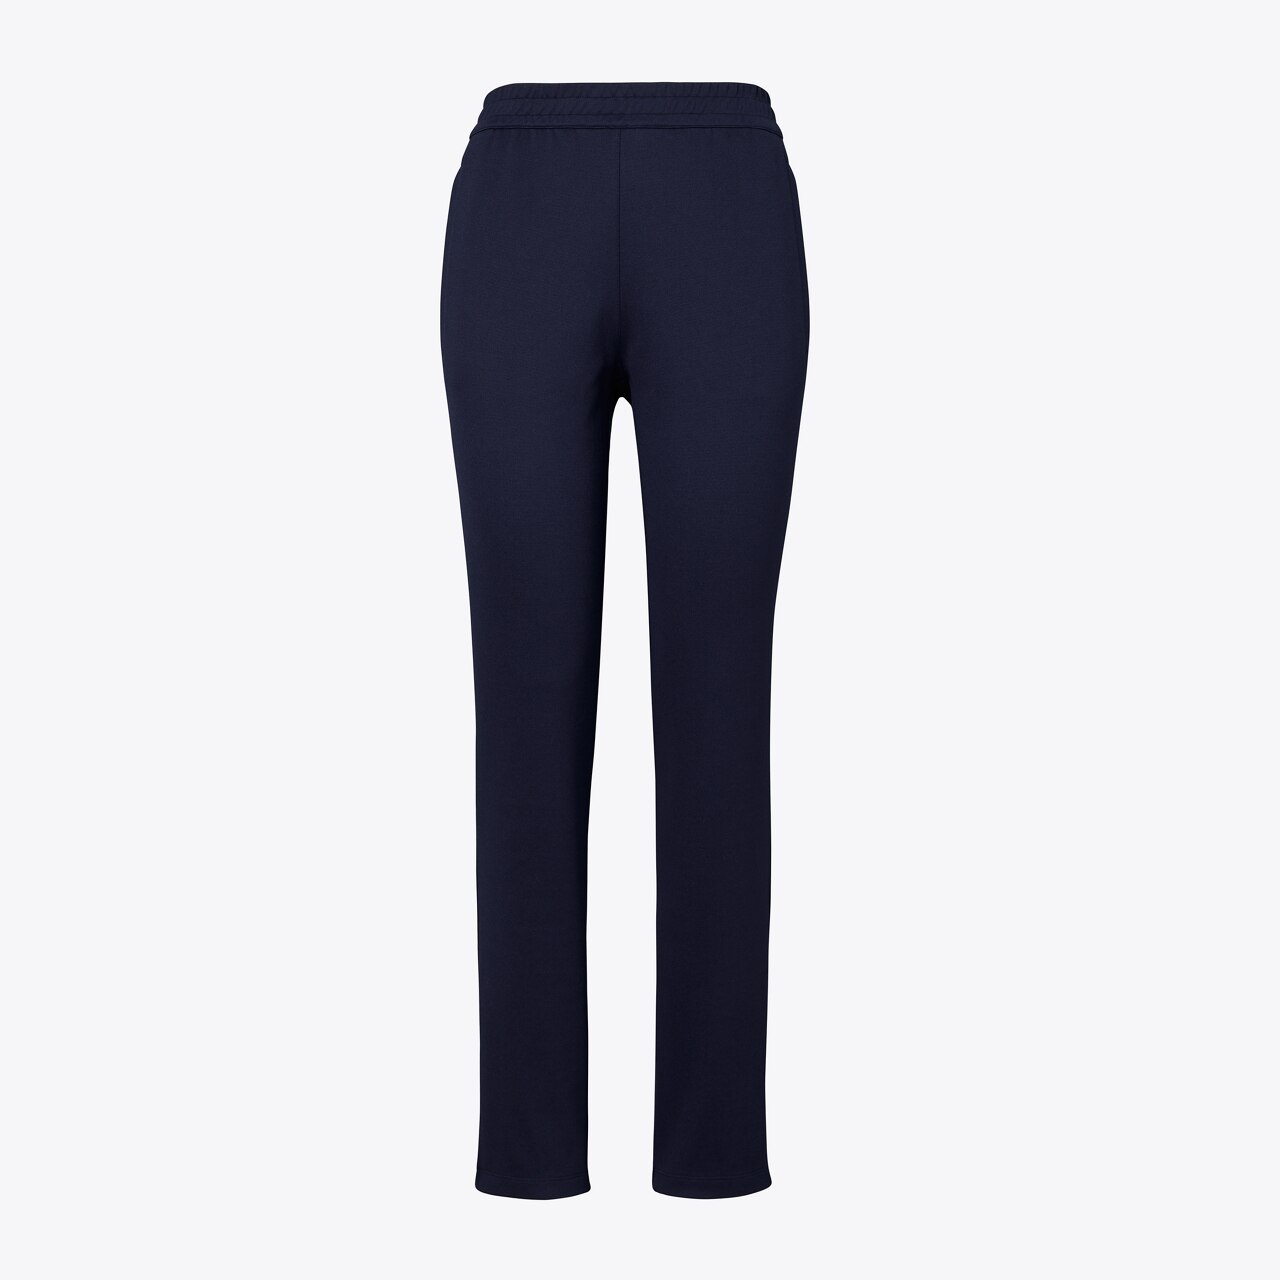 https://s7.toryburch.com/is/image/ToryBurch/style/double-knit-track-pant-front.TB_155630_472_SLFRO.pdp-1280x1280.jpg